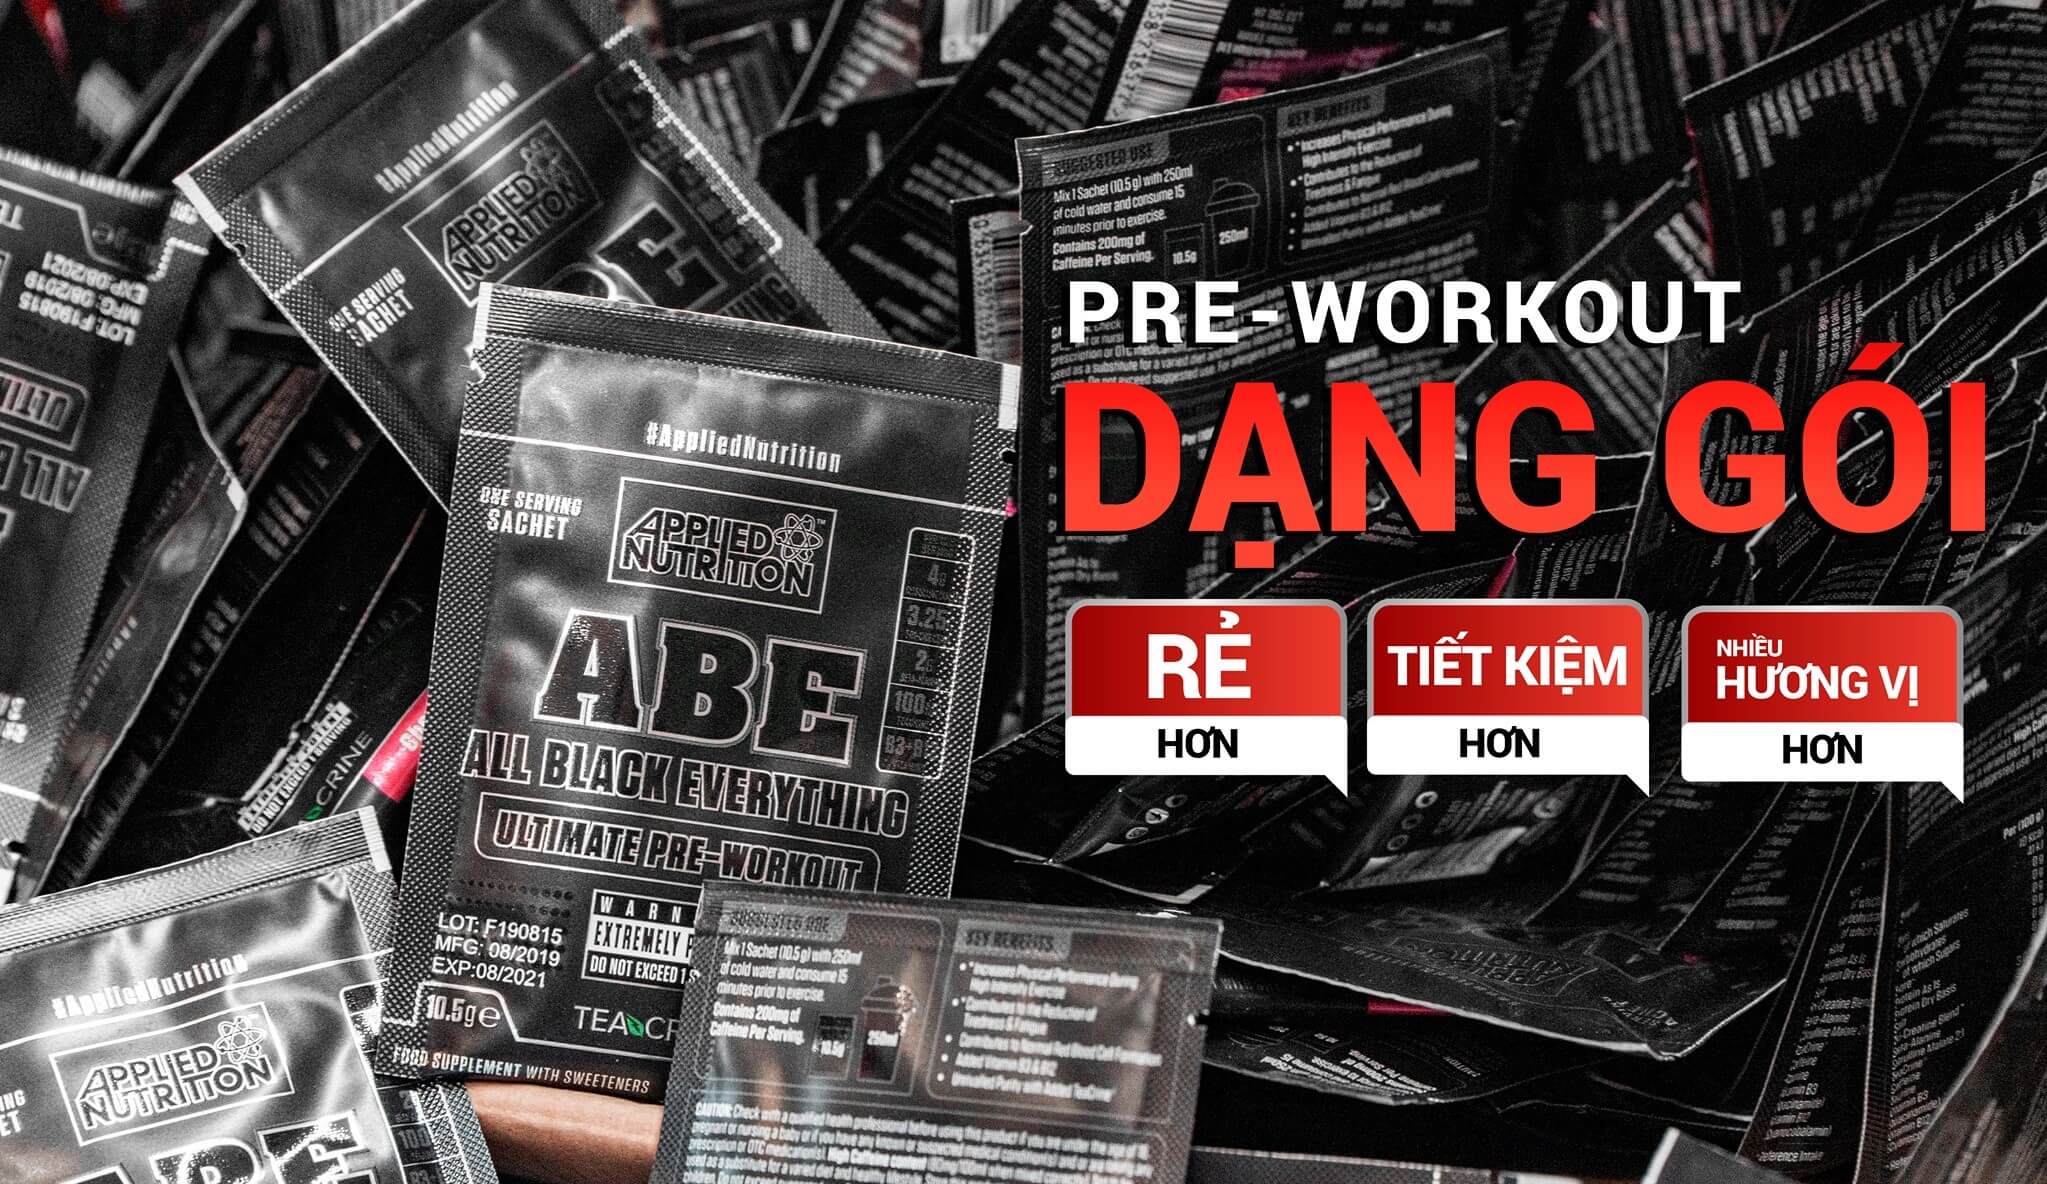 Applied-nutrition-ABE-pre-workout-dang-goi-gymstore